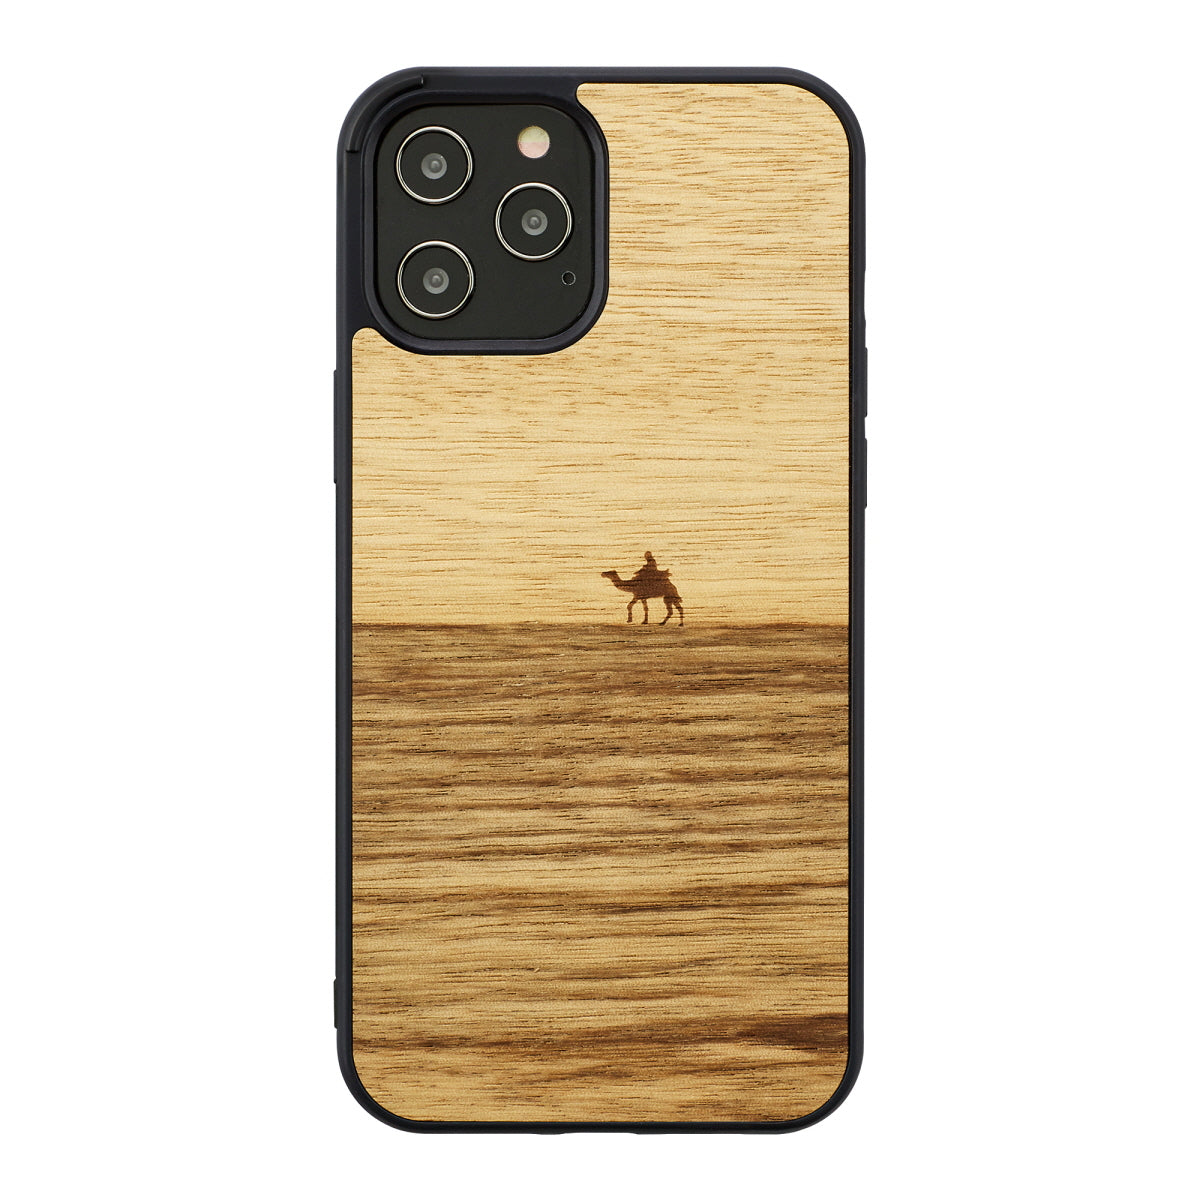 Man & Wood Case For iPhone 12 Pro Max - Terra